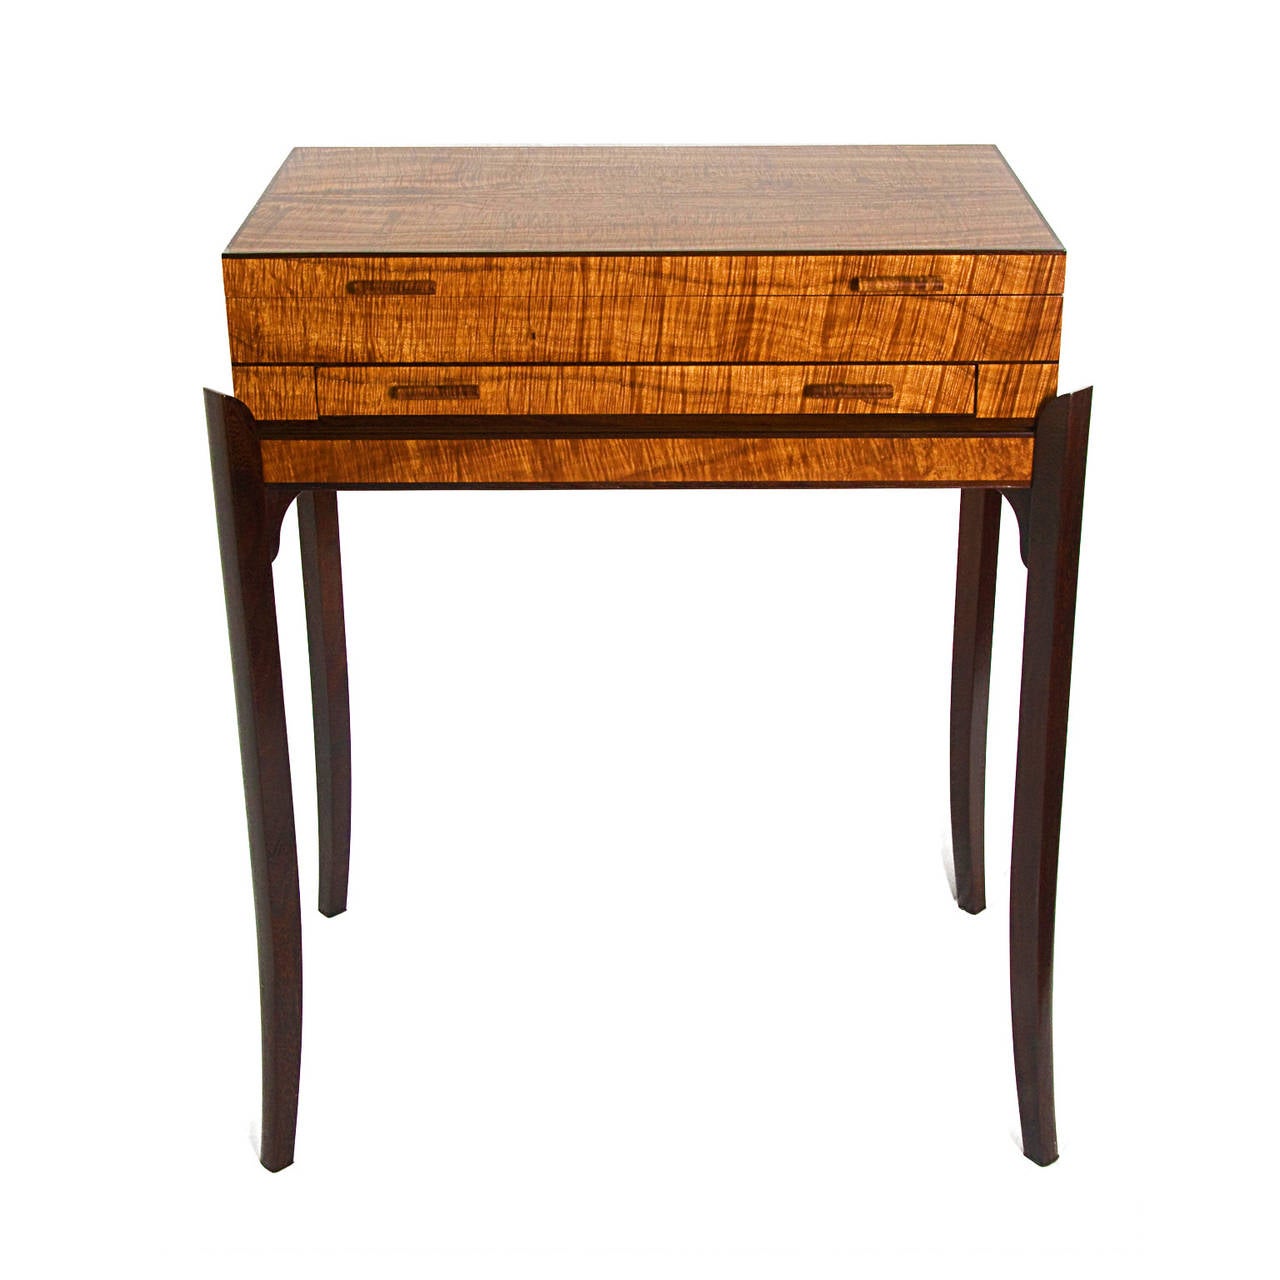 Contemporary chest and stand for storing cigars, displaying jewelry or other small collectors items. The chest is made of curly koa with pheasant wood (senna siamea) trim and legs. The inside of the chest is lined with fragrant Port Orford